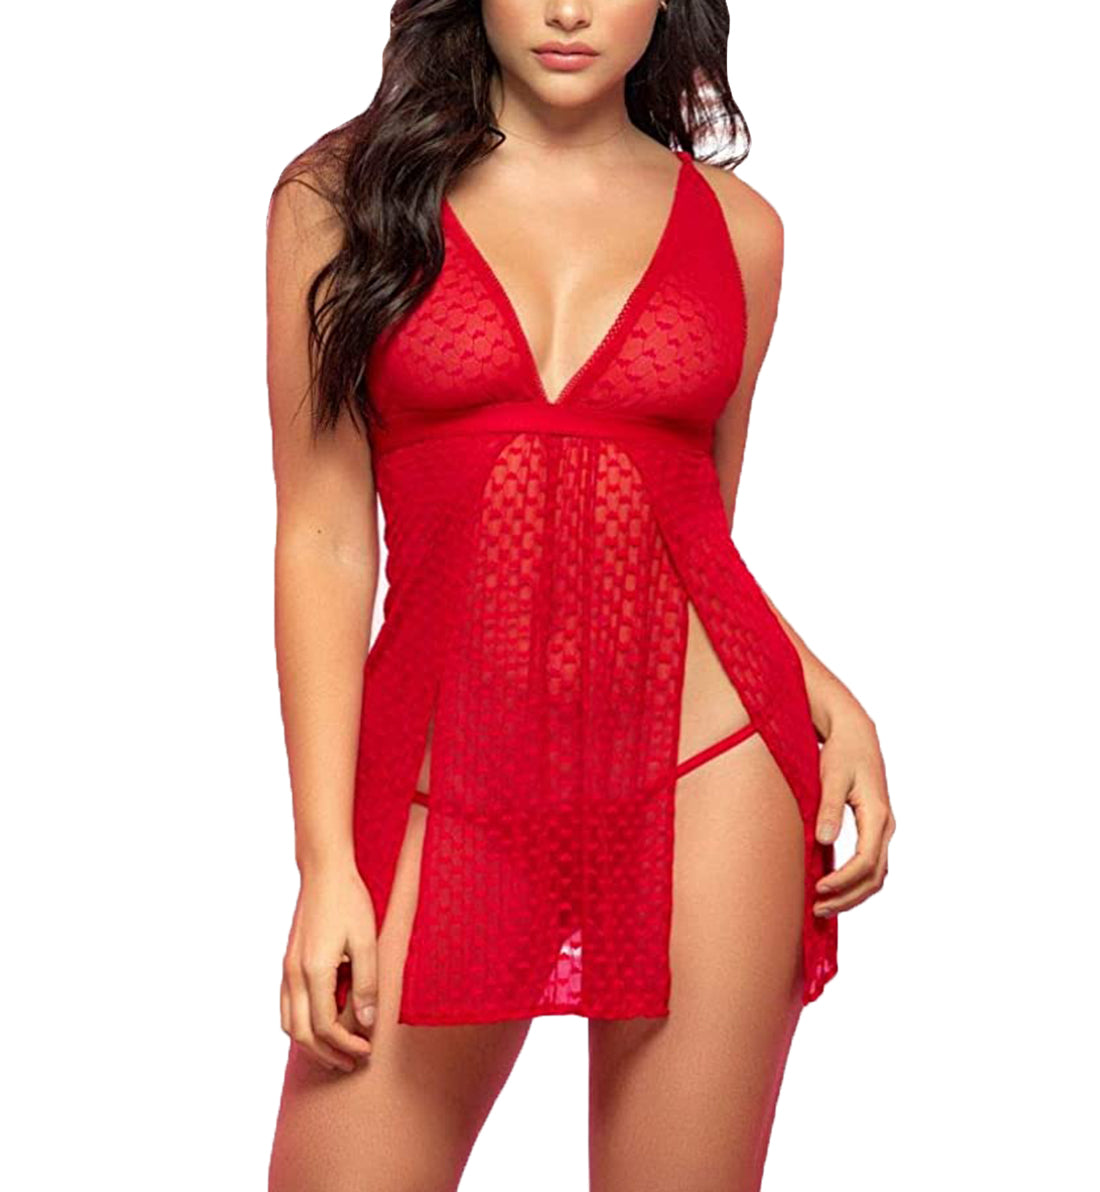 Mapale Split Side Sheer Babydoll with Matching G-String (7353),S/M,Red - Red,S/M